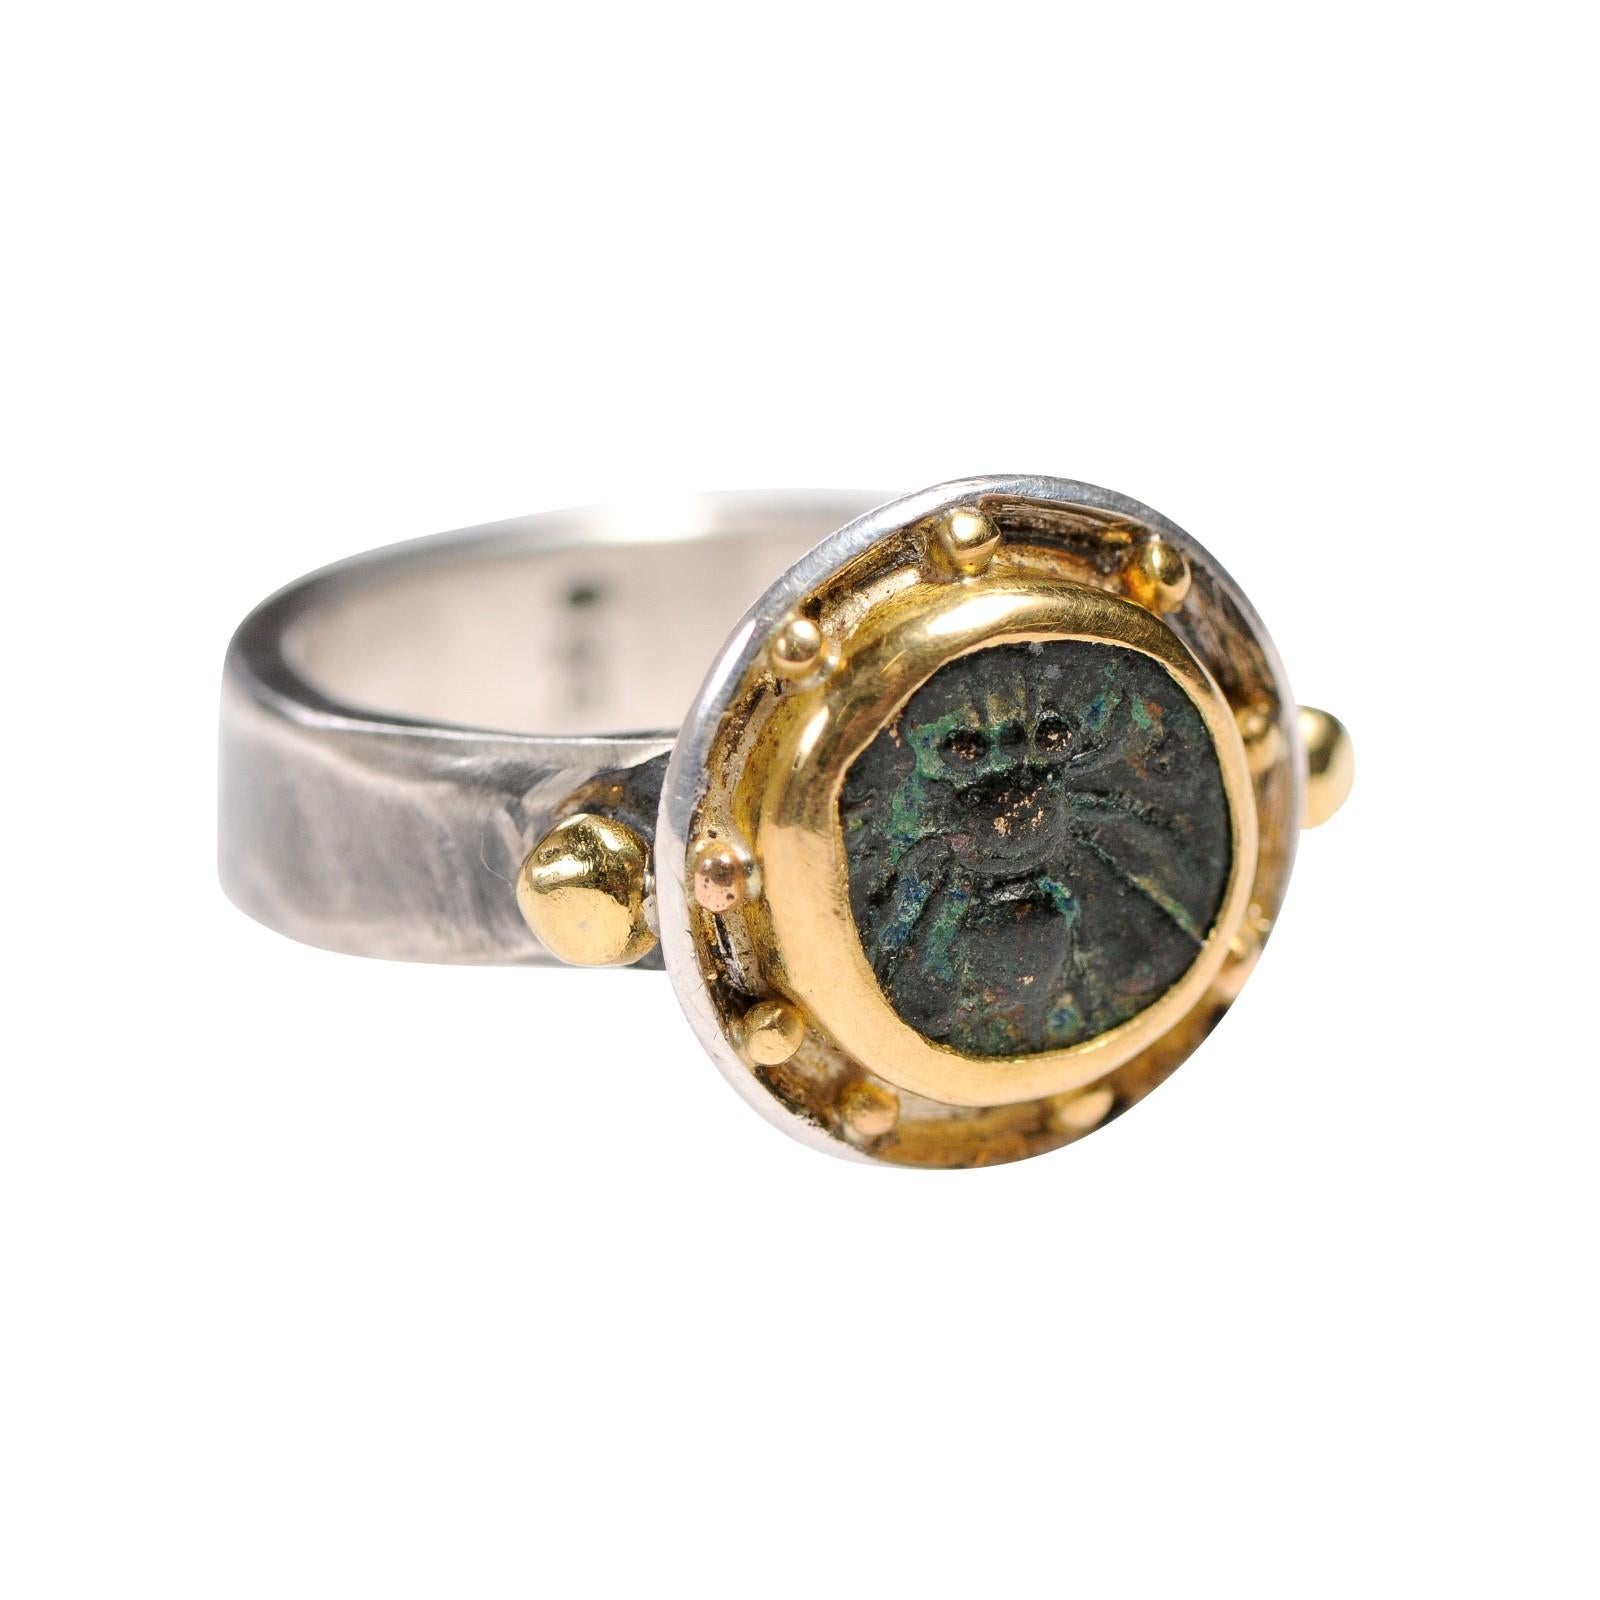 Ephesus Bee/Stag ring 22kt gold and An authentic ancient Greek bronze coin from Ephesos, Ionia (circa 1st century BC) custom mounted within a 22k gold round bezel with ball accents, and an outer sterling silver bezel (two-tone metal) and band.